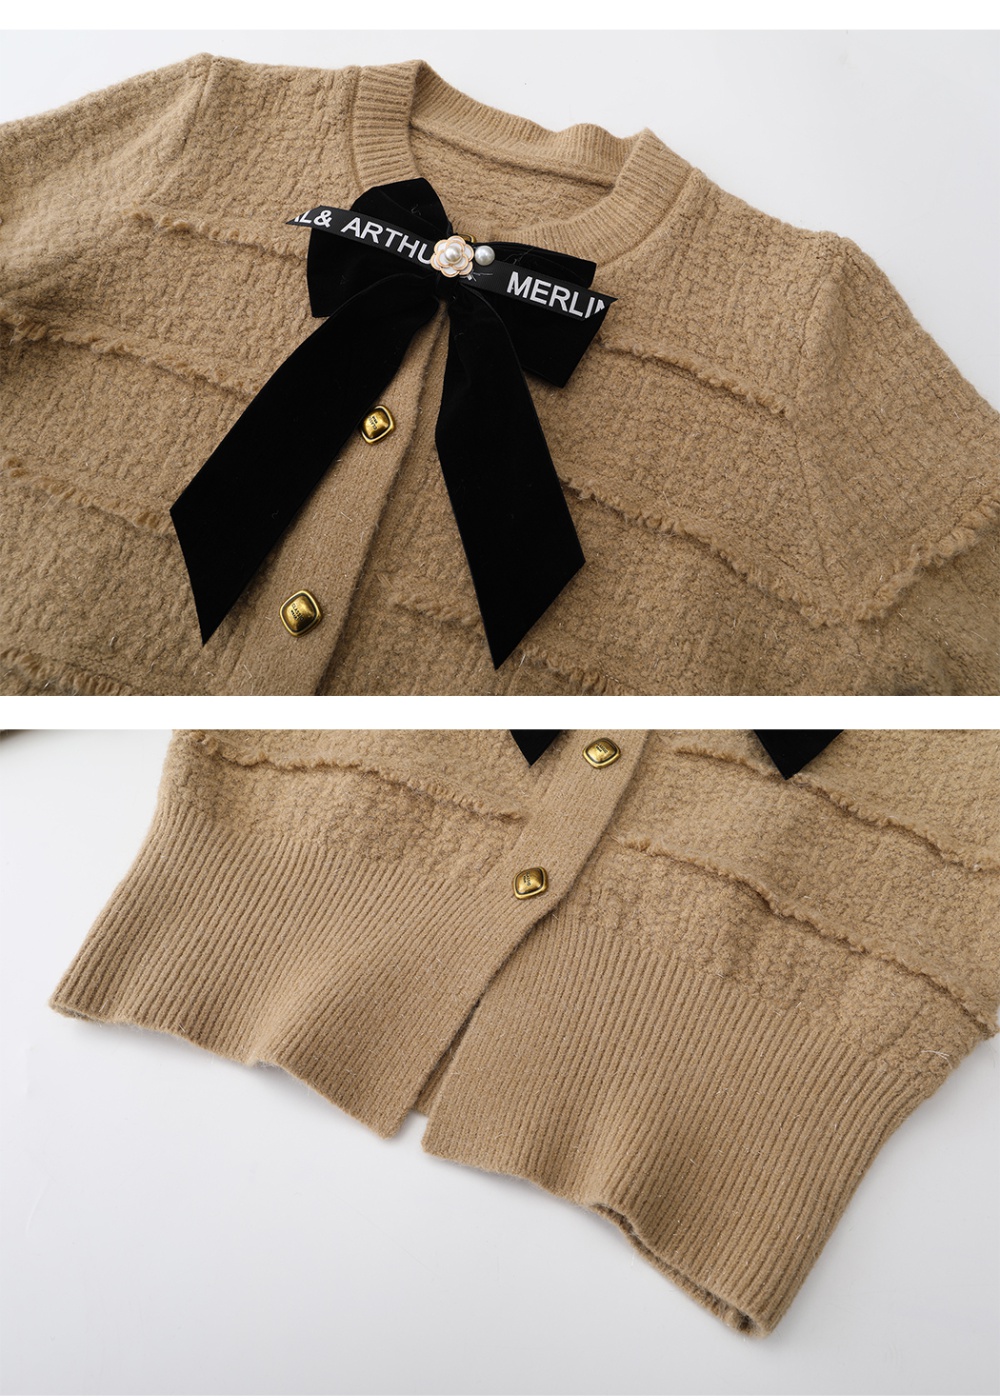 France style bow sweater slim cardigan for women